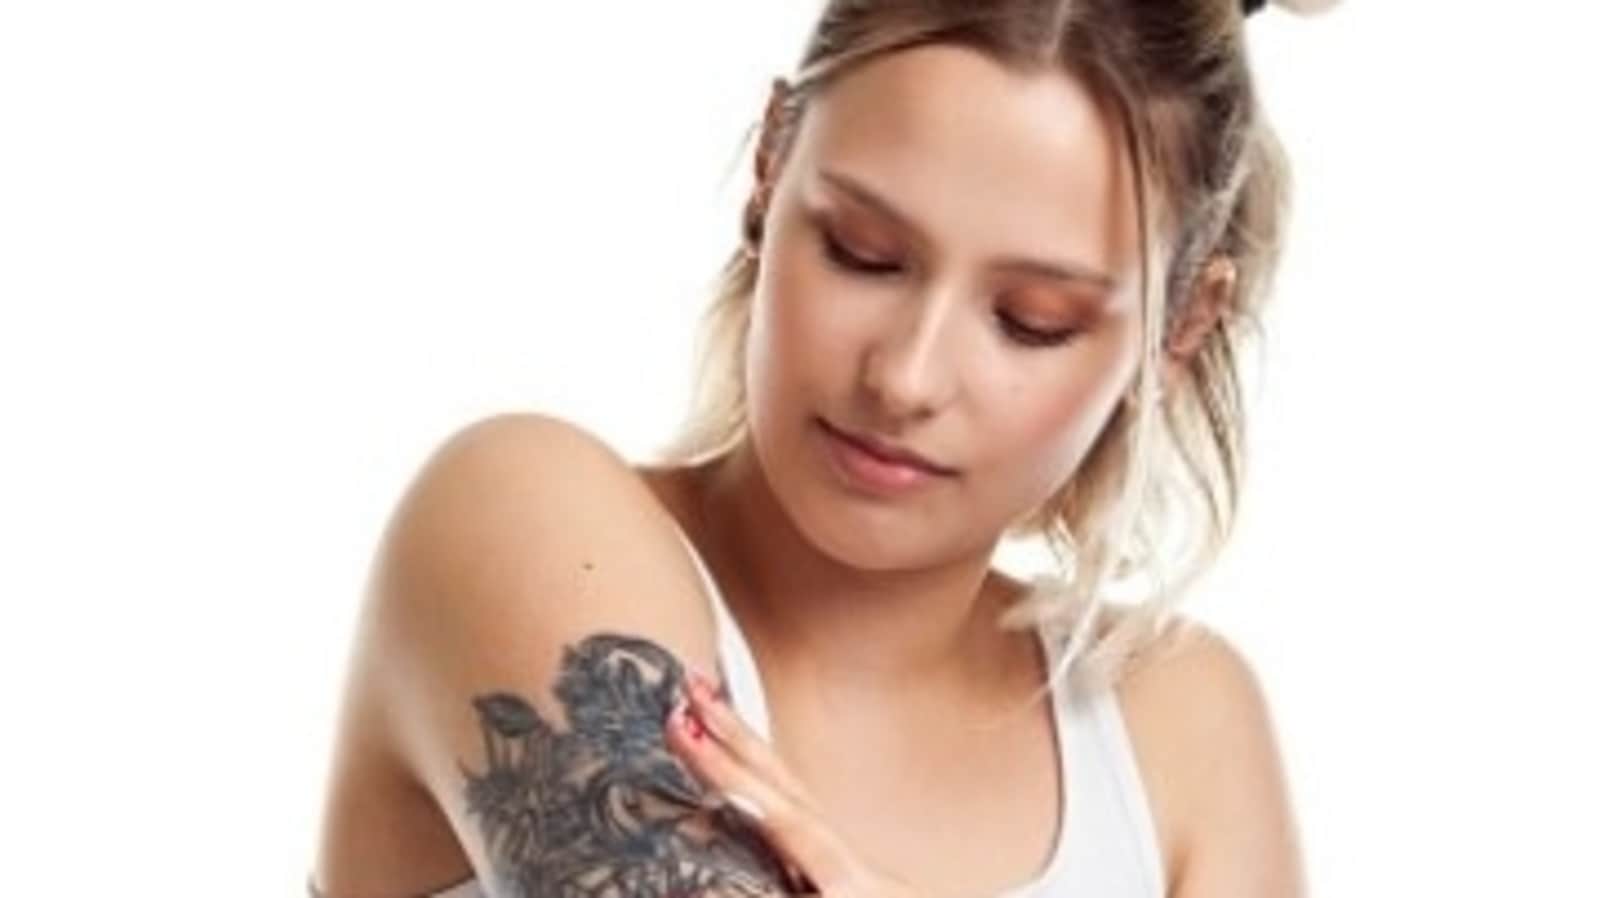 15 Best Lotions for Healing a Tattoo in 2023